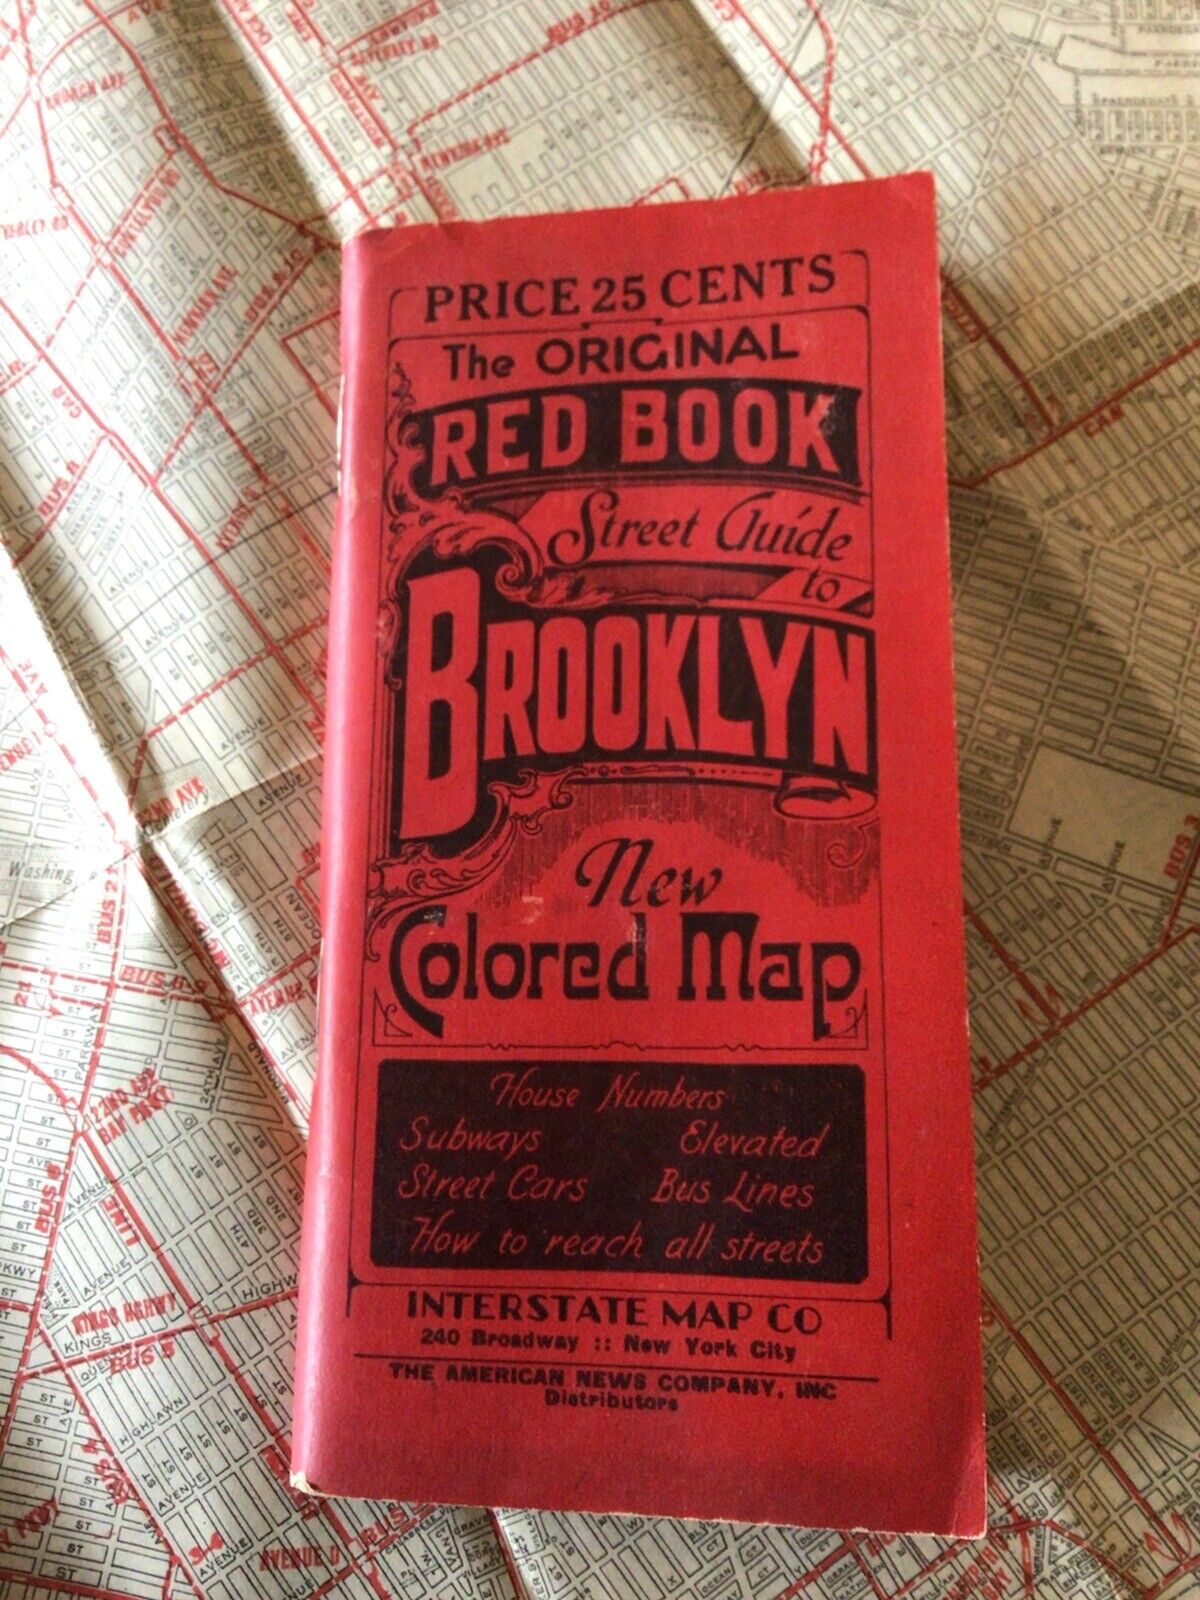 Original Mint 1936 RED BOOK GUIDE TO BROOKLYN + Great Colored MAP Of Brooklyn